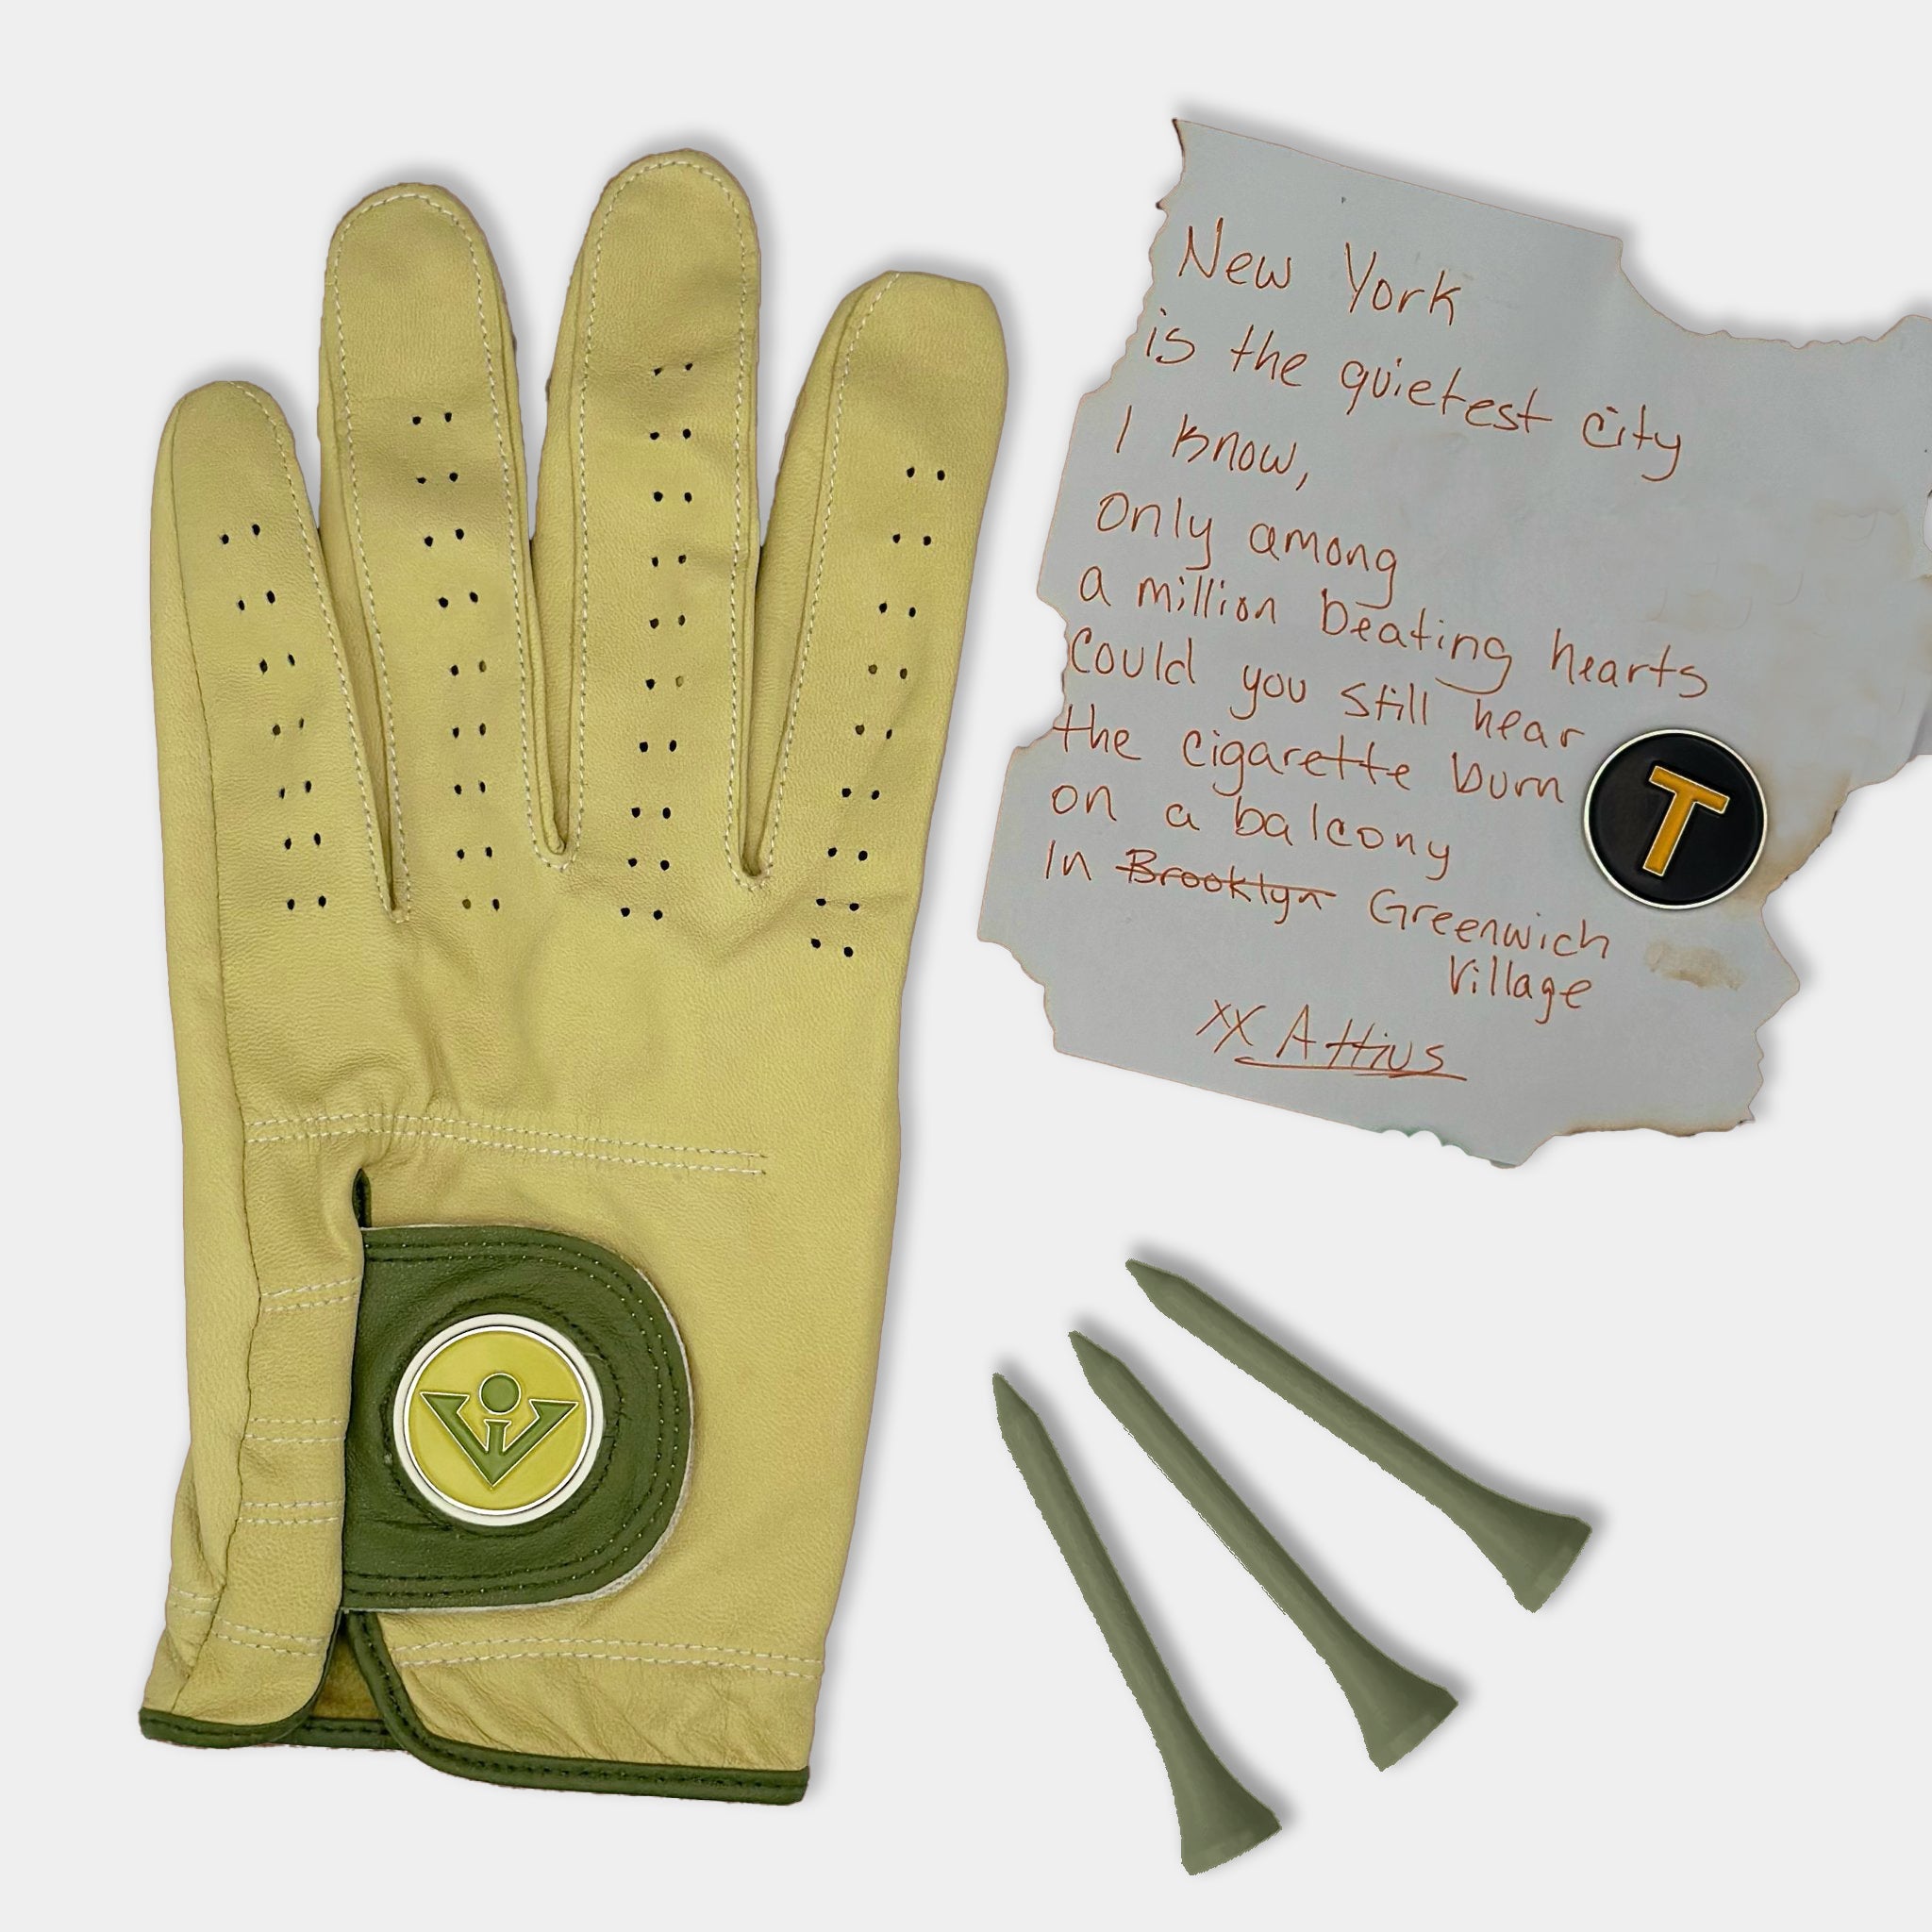 Yellow and Green golf glove with ball markers surrounded by earthy tones, wood, and a poem to represent Greenwich Village's Bohemian Style.Yellow and Green golf glove with ball markers surrounded by earthy tones, wood, and a poem to represent Greenwich Village's Bohemian Style.